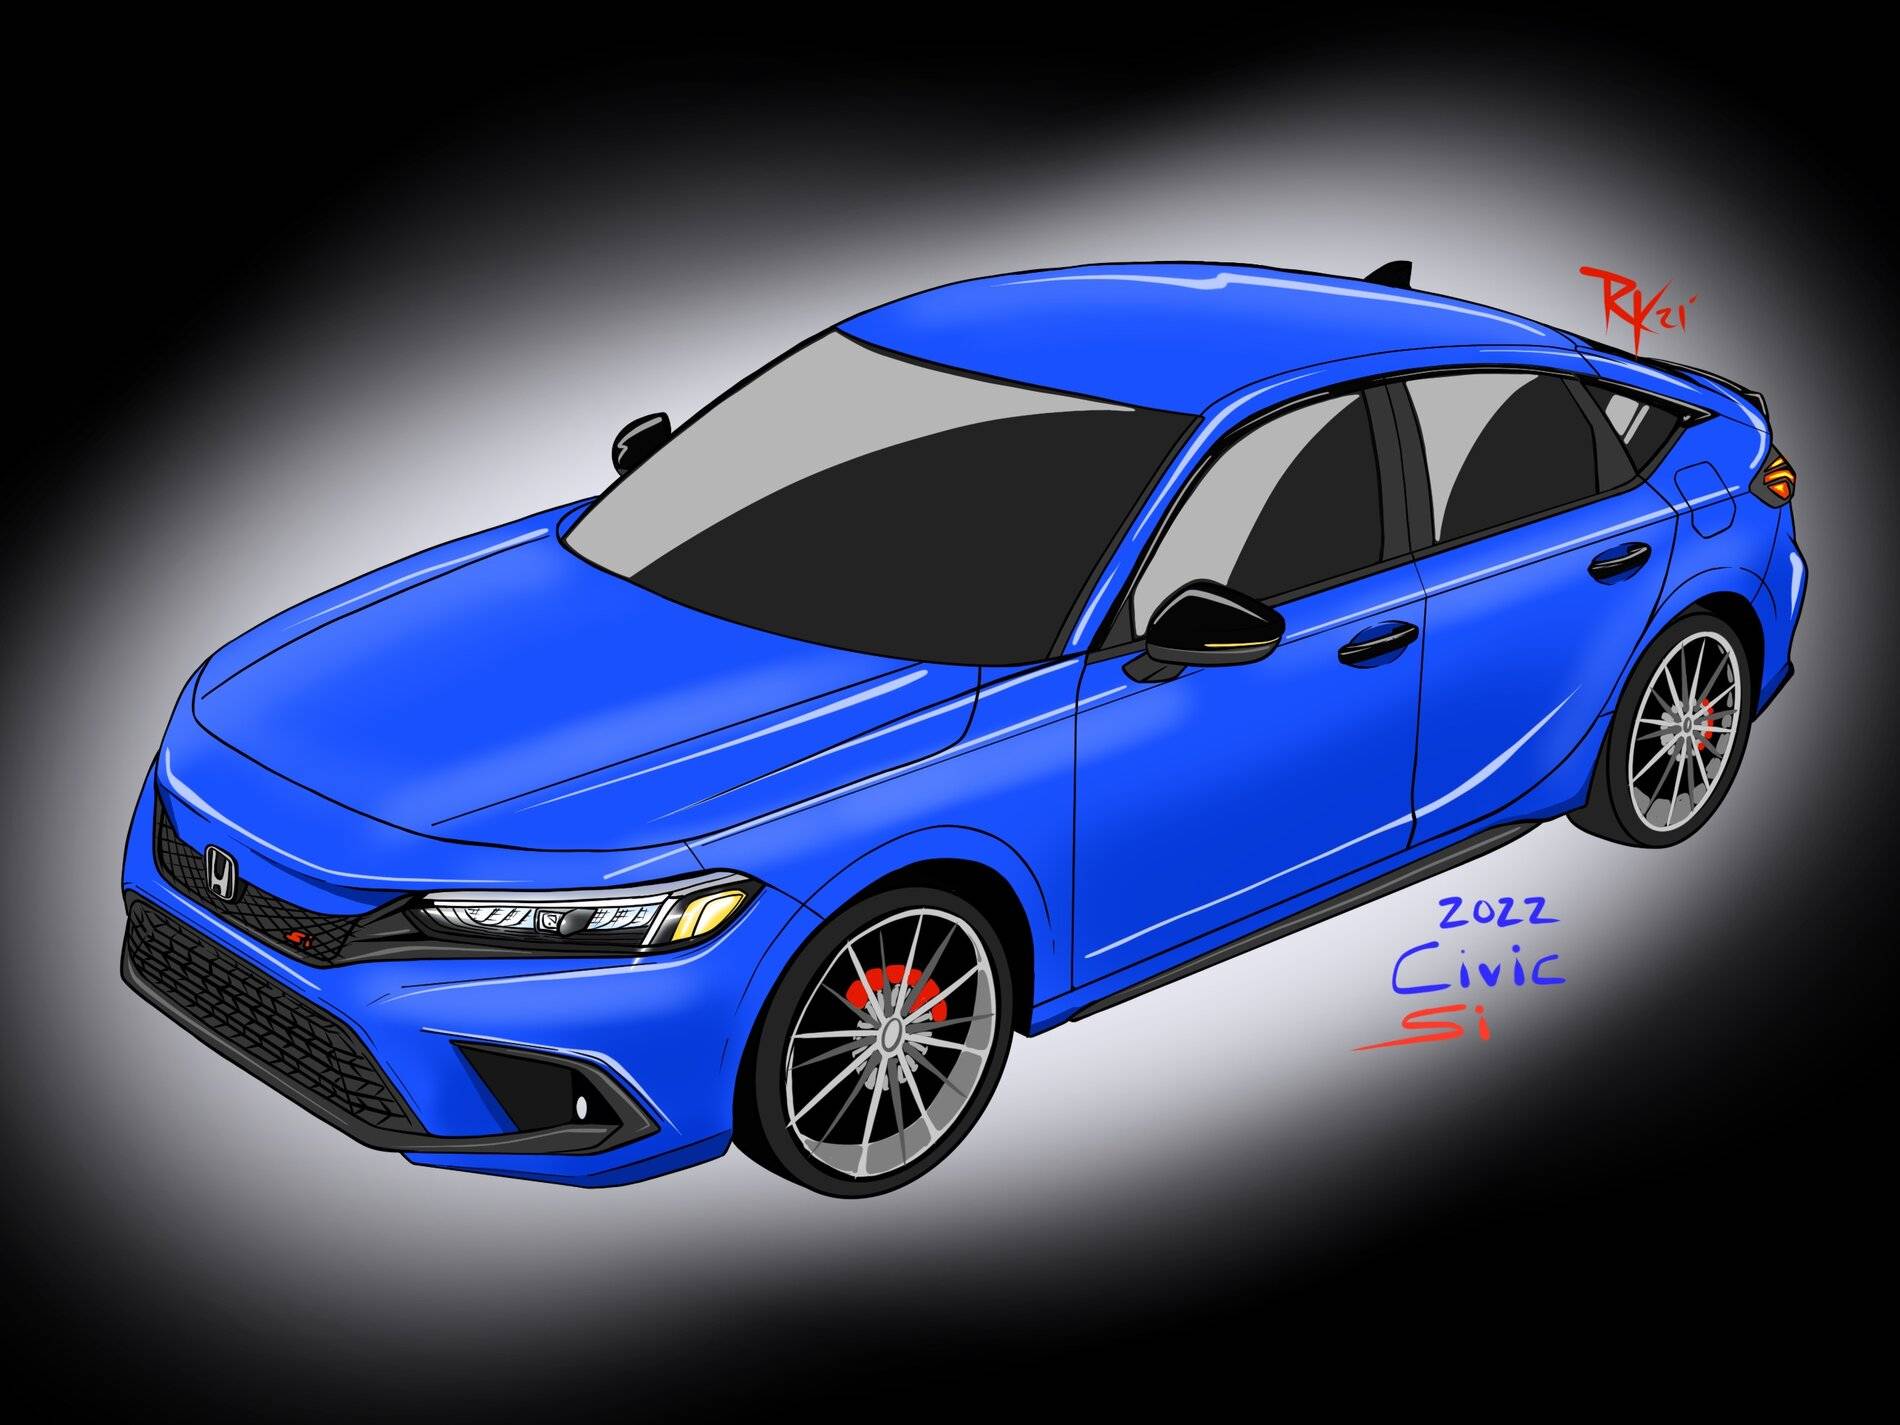 11th Gen Honda Civic Exclusive: 11th Gen 2022 Civic (Hatchback) Fully Revealed in Official Honda Patent Images 79E15ADC-C3B6-404D-A006-036A27052C62